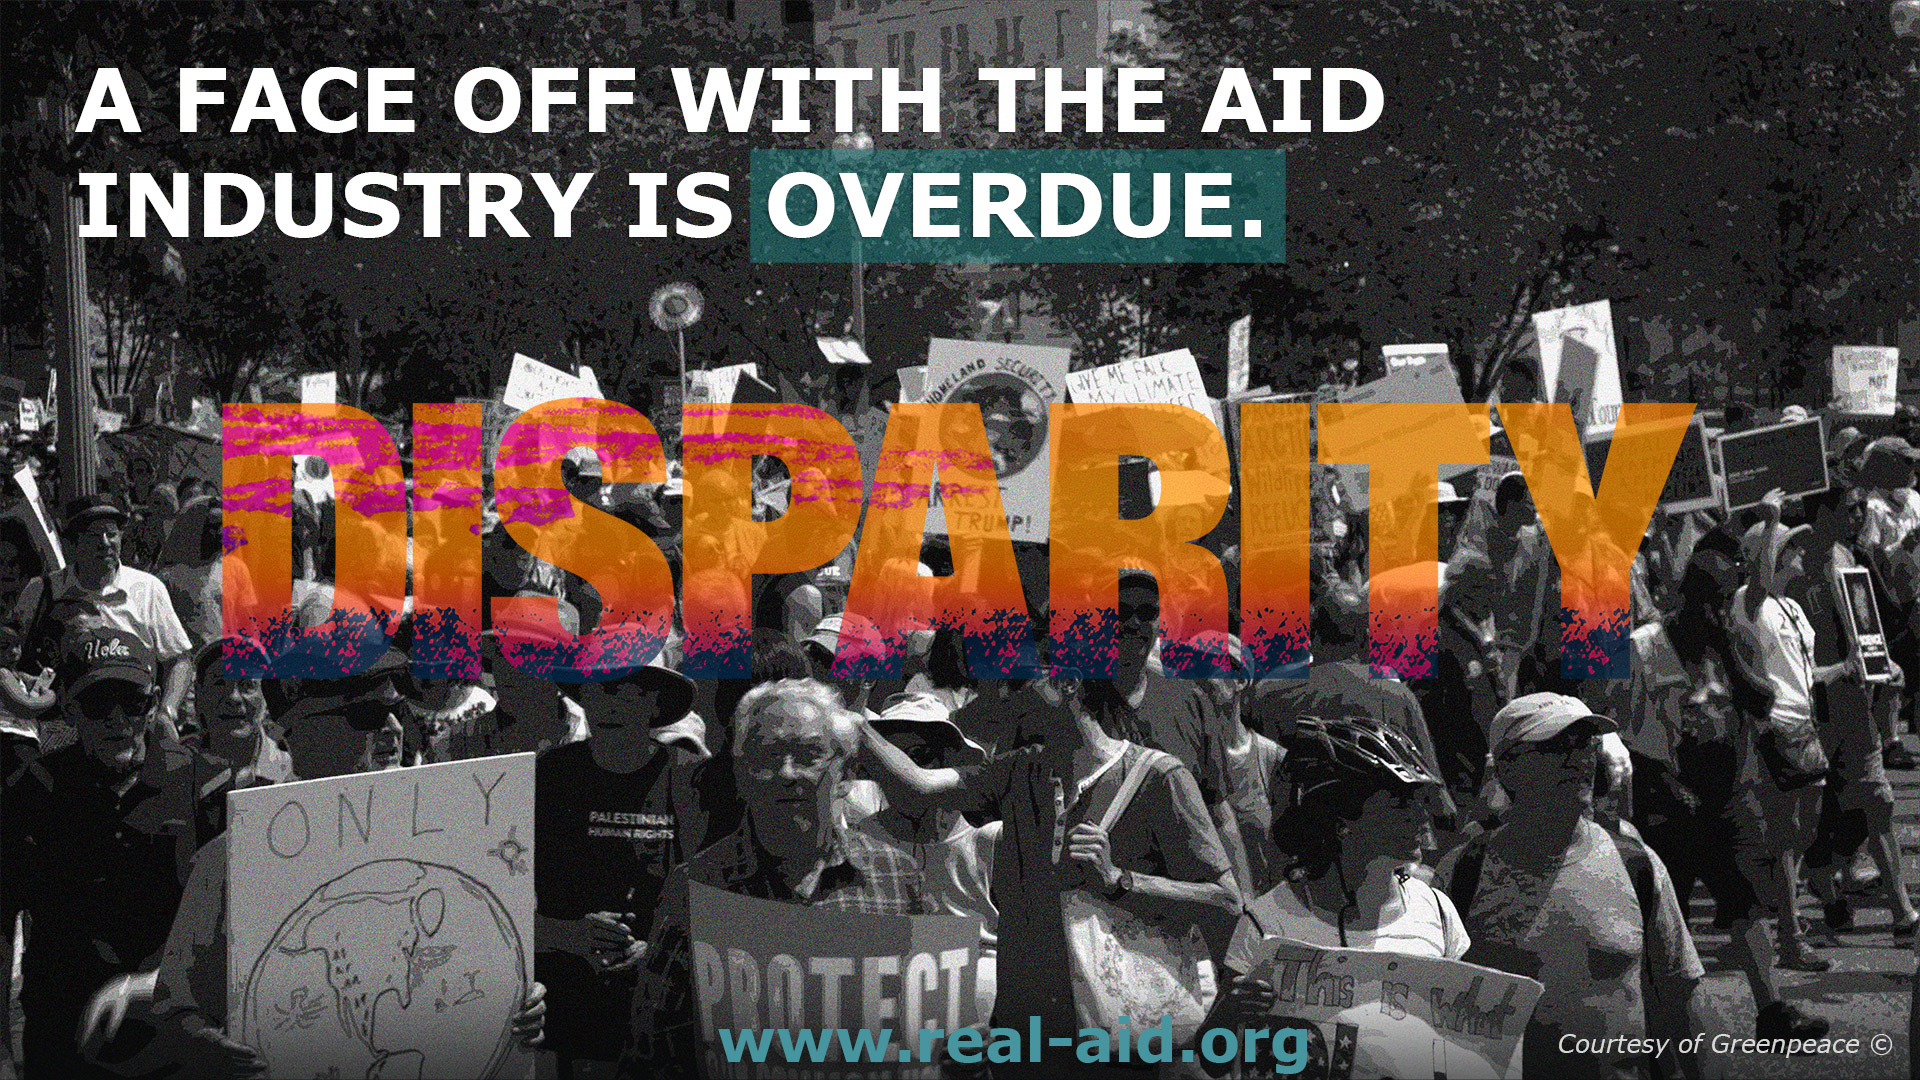 Disparity Film poster, A face off with the aid industry is overdue text, protest revolution image